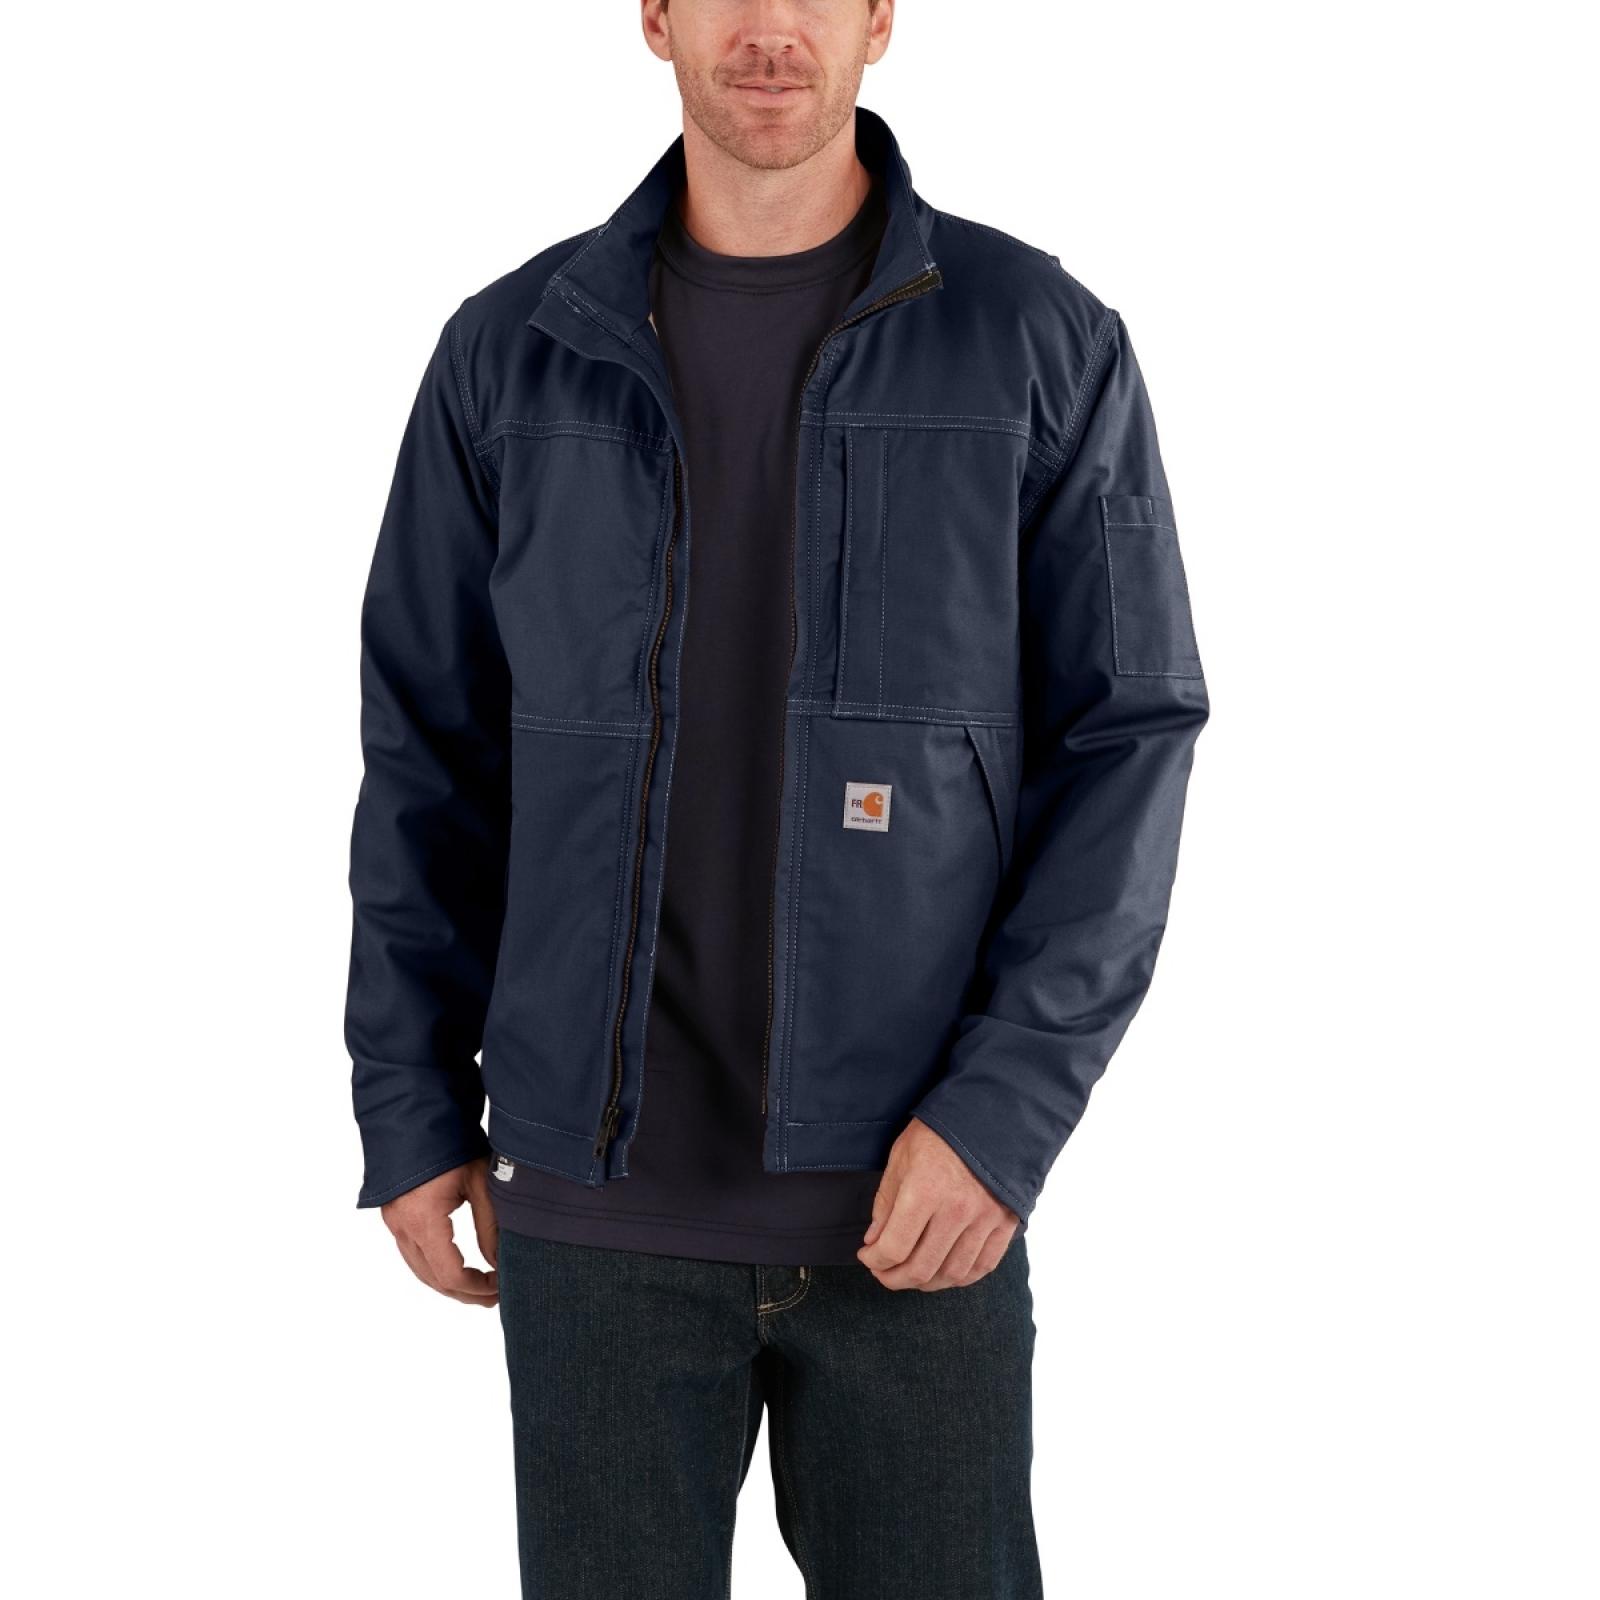 Carhartt Full Swing® Quick Duck® Flame-Resistant Jacket Front